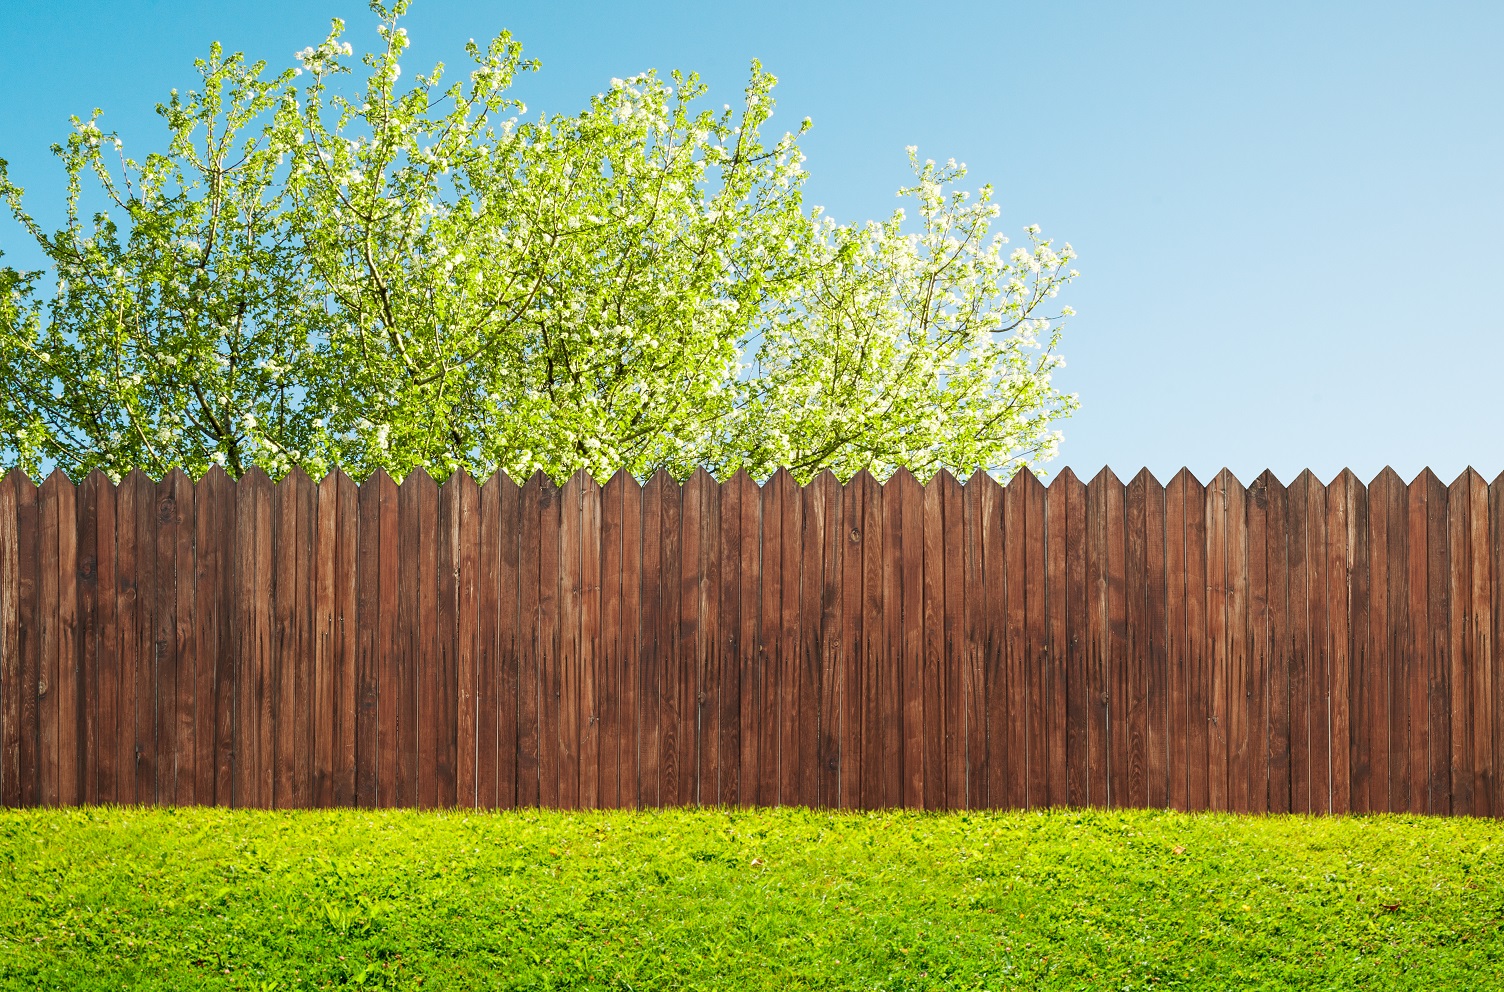 5 Ways to Prepare Your Yard for Fence Installation